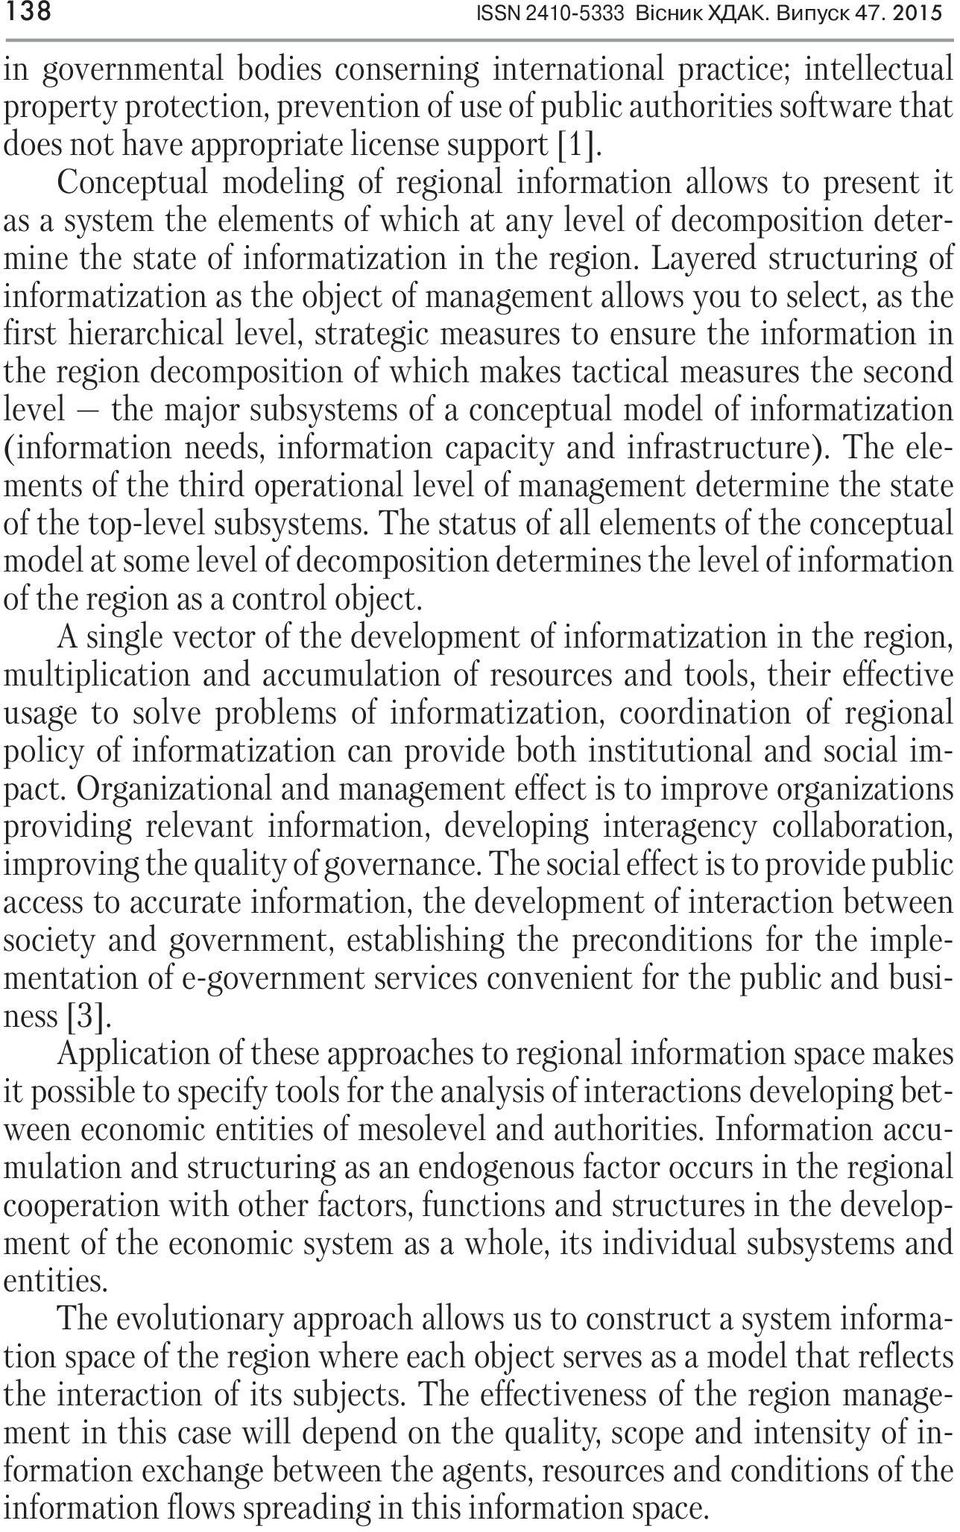 Conceptual modeling of regional information allows to present it as a system the elements of which at any level of decomposition determine the state of informatization in the region.